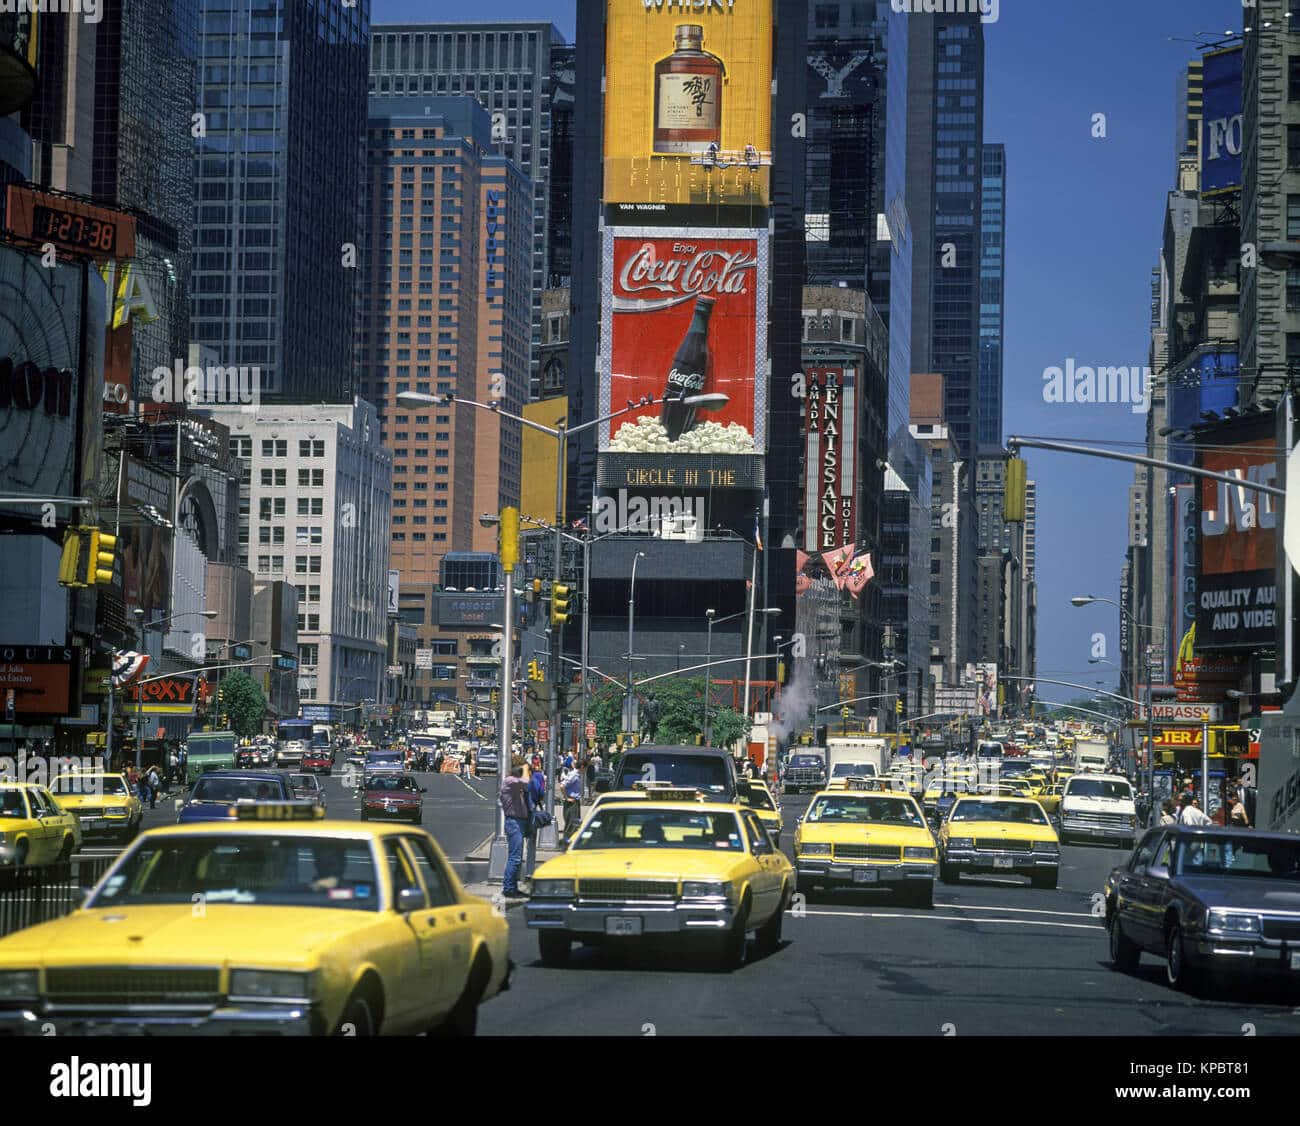 1992 HISTORICAL YELLOW TAXI CABS TIMES SQUARE MANHATTAN NEW YORK CITY ...